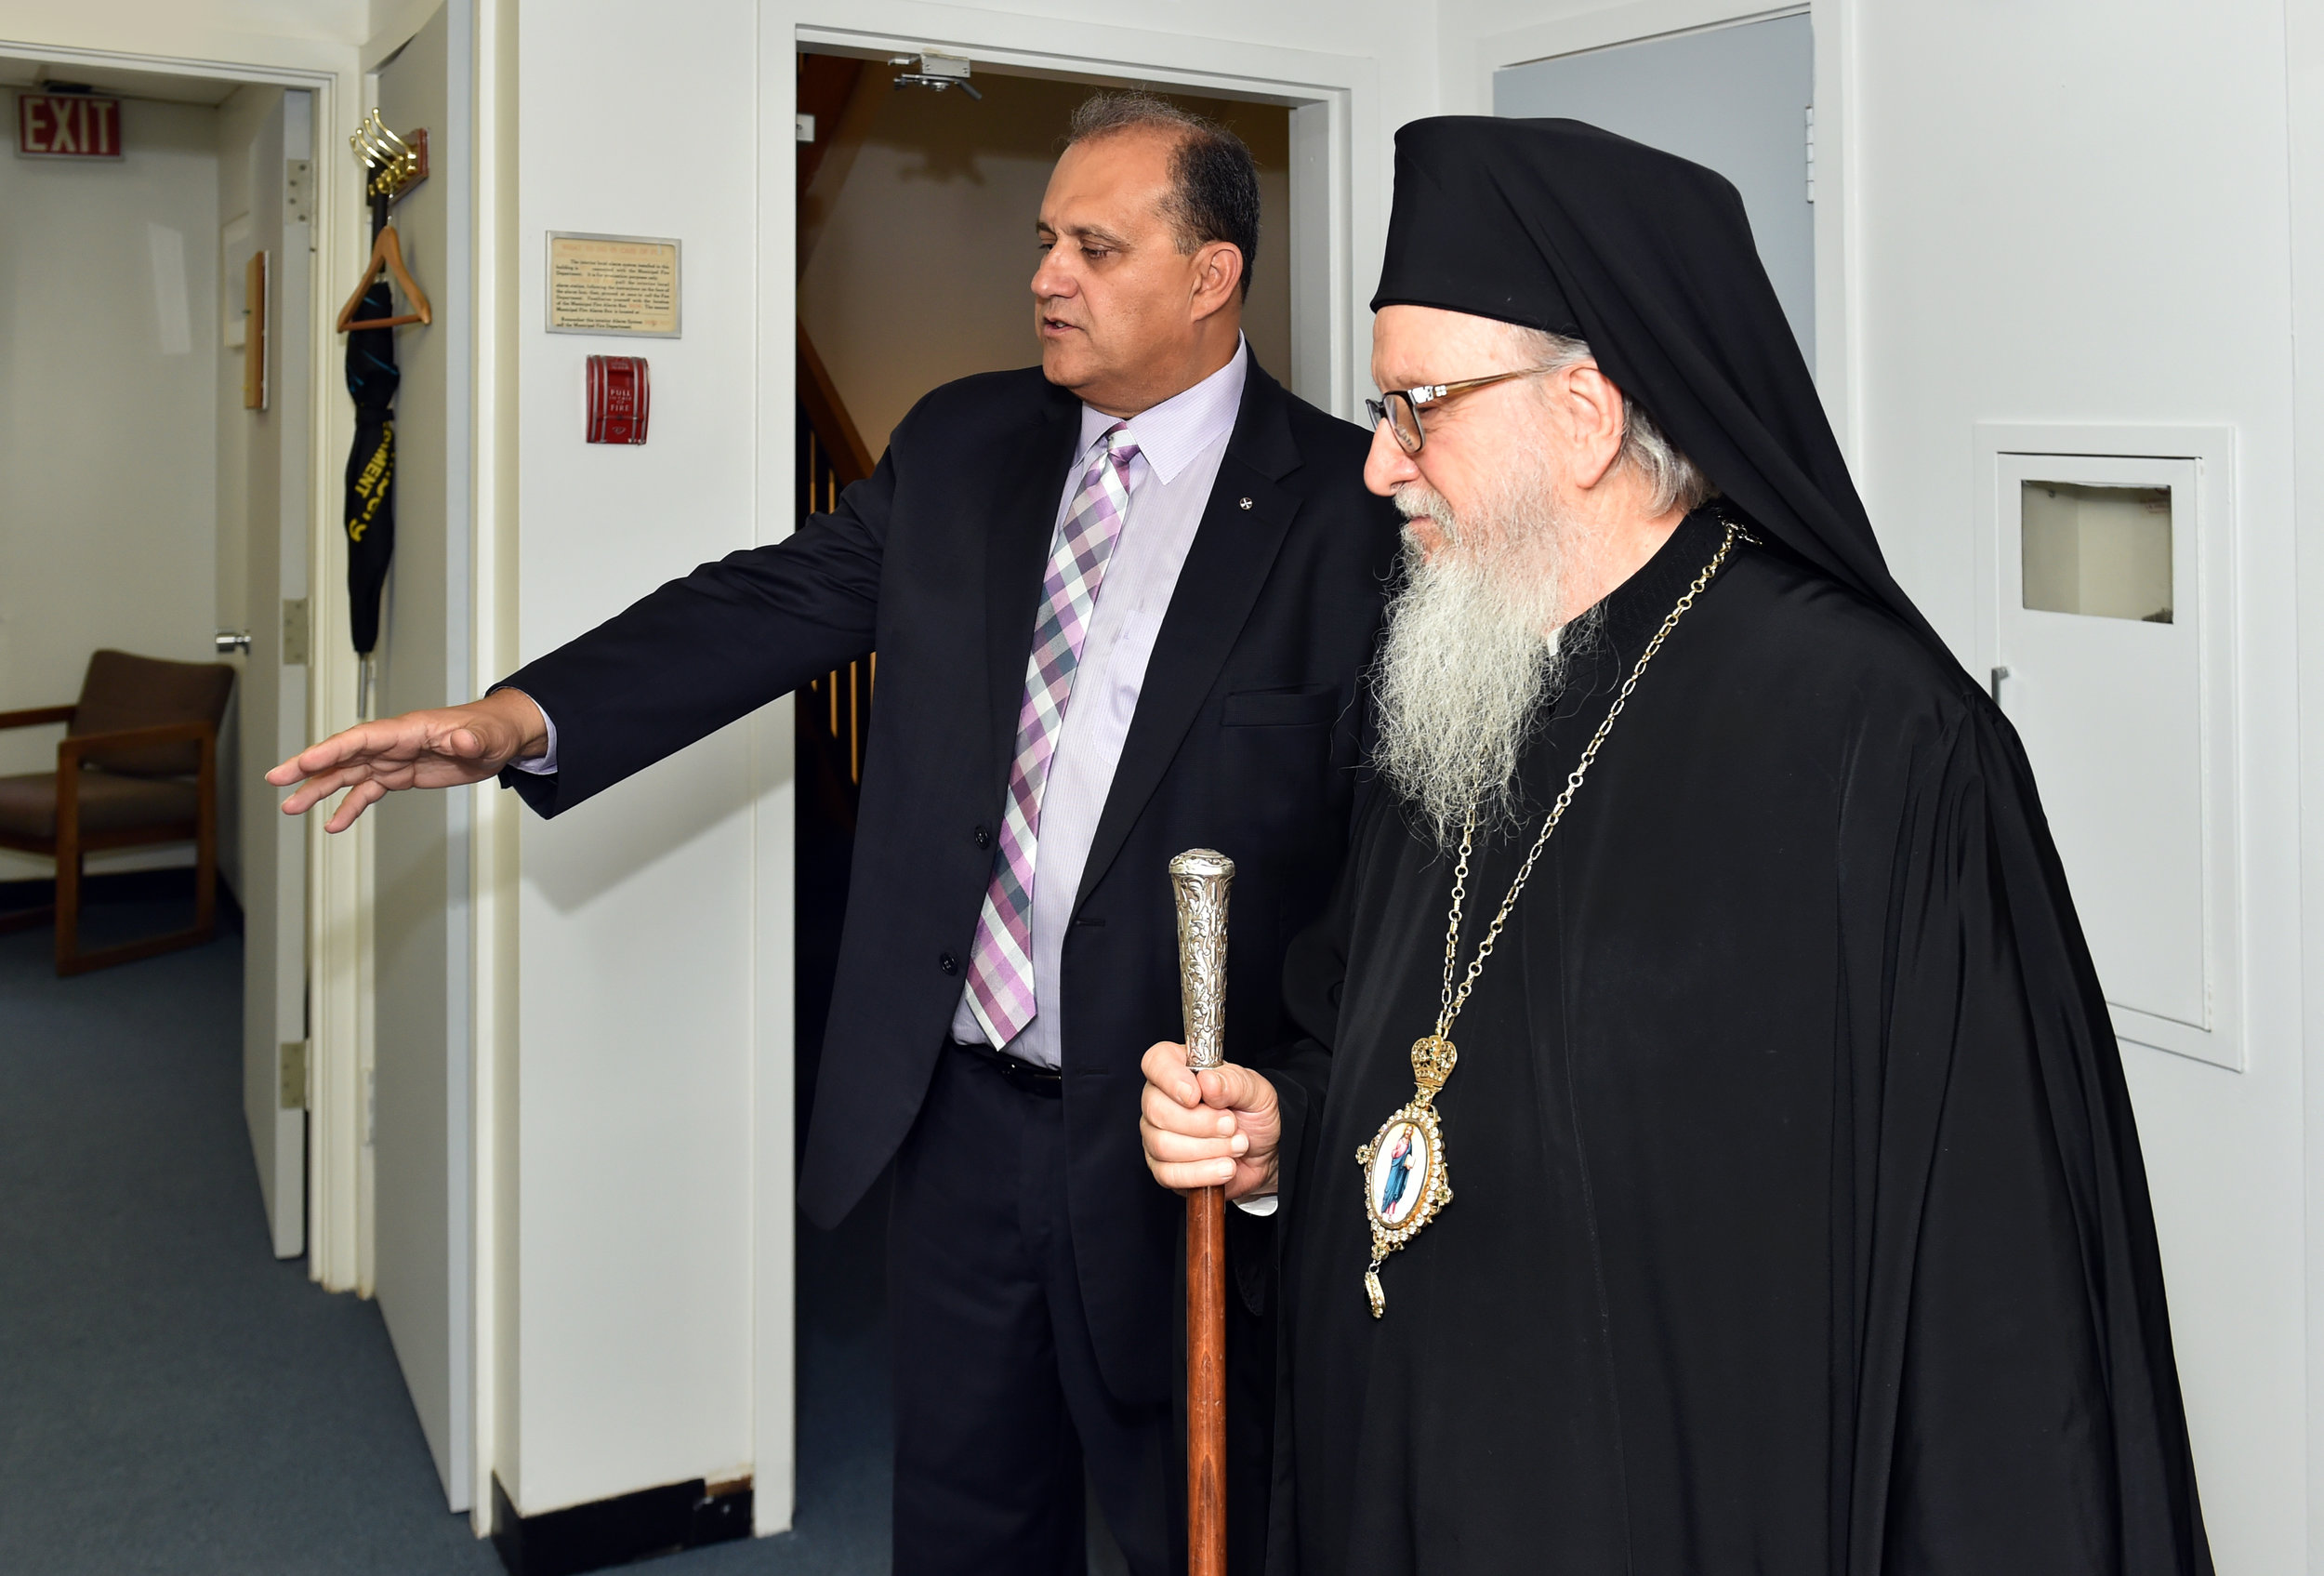  Nick Larigakis provides a tour of the Hellenic House to His Eminence Archbishop Demetrios of America. 